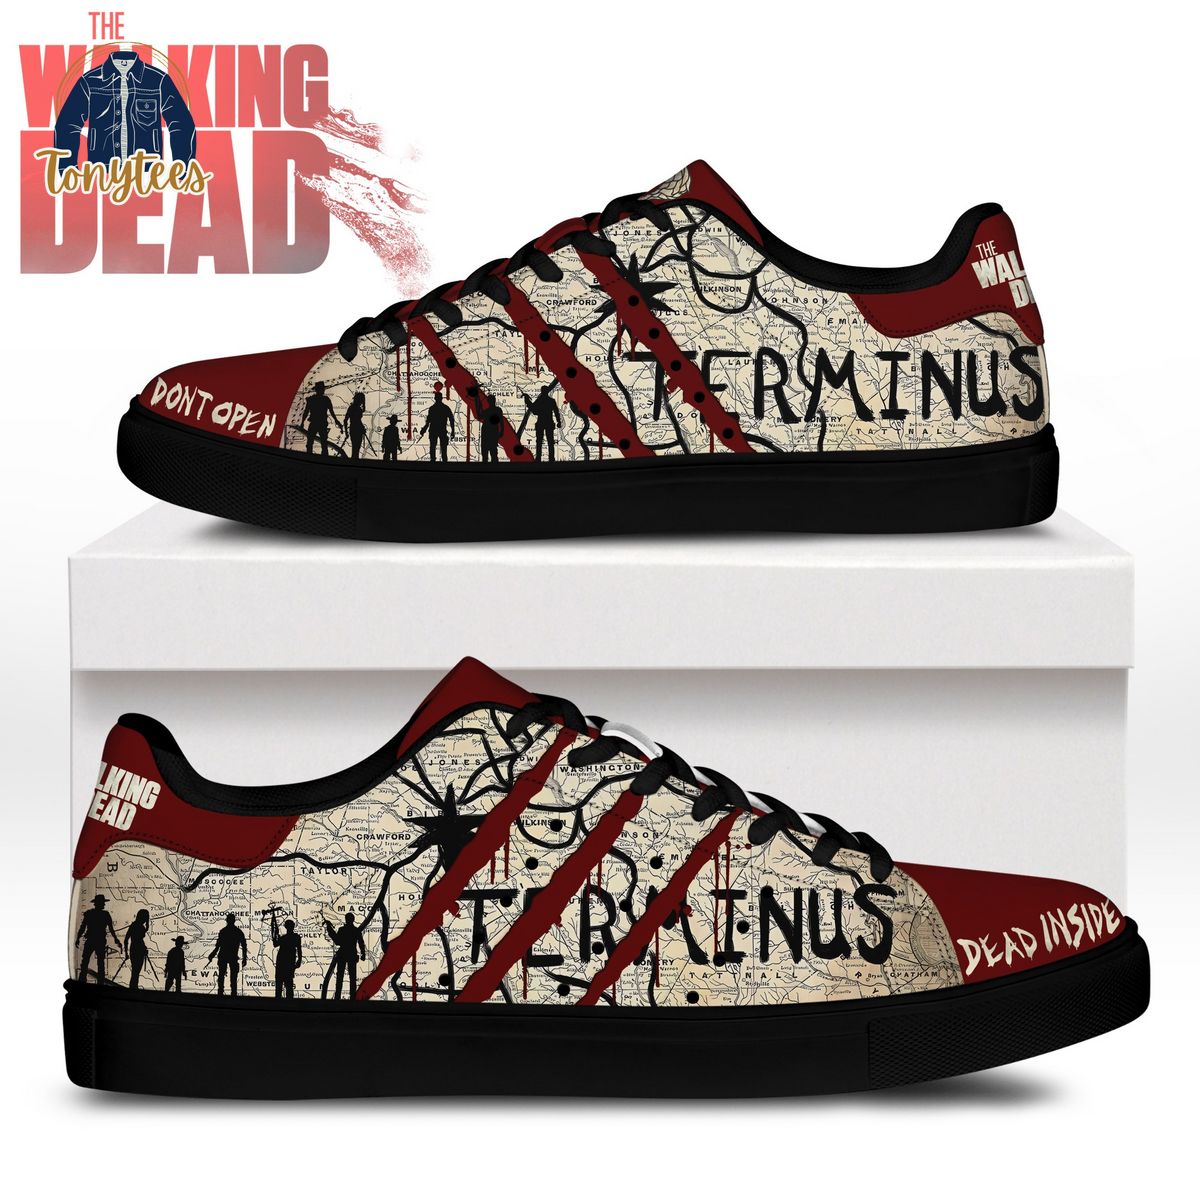 The walking dead terminus adidas stan smith shoes